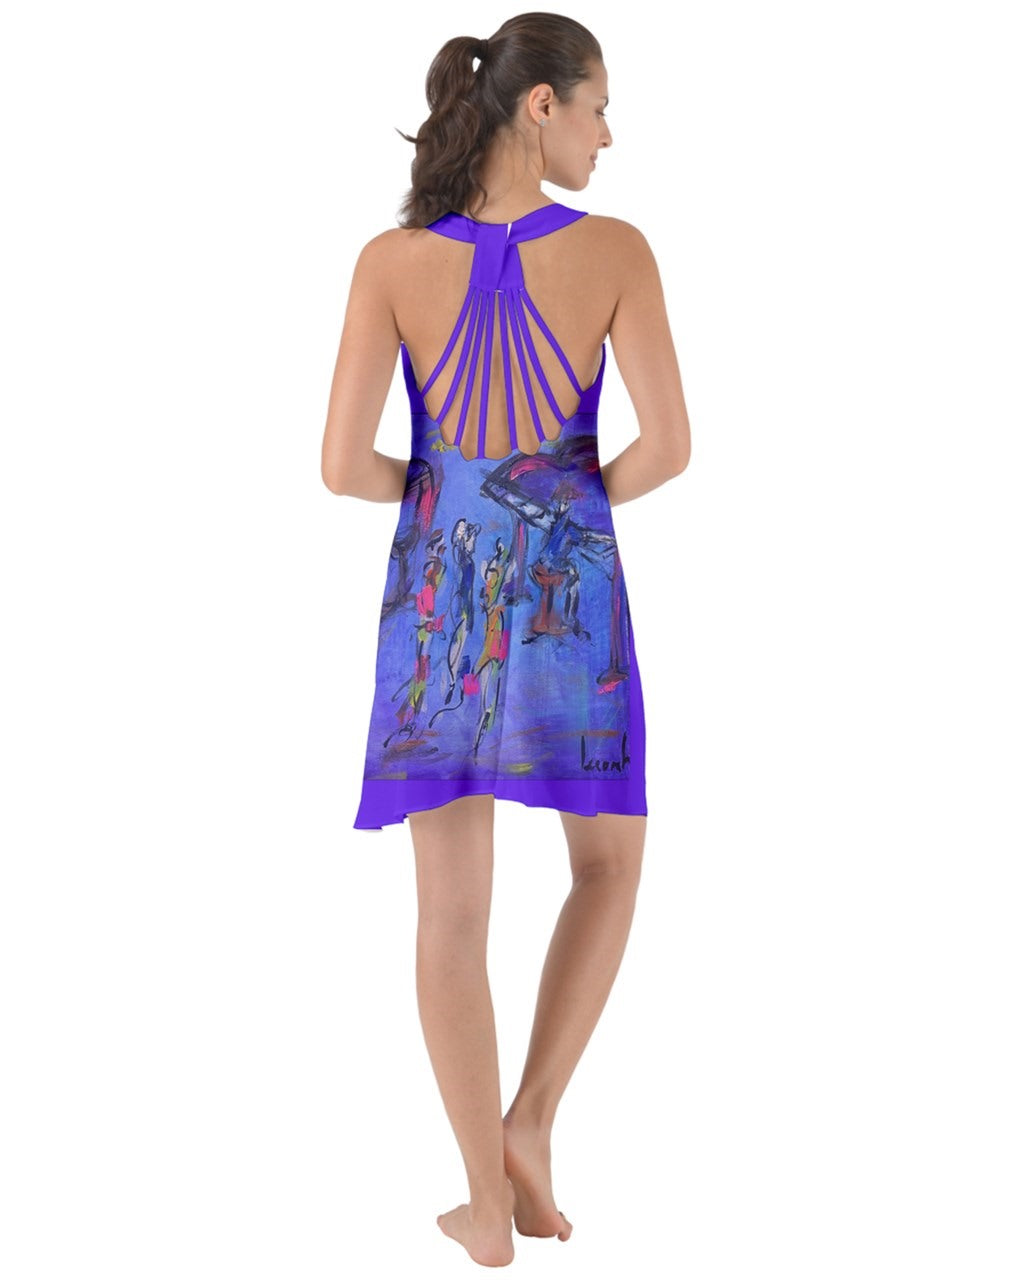 A captivating purple swirling dress featuring criss-cross back straps, adorned with original art by Leeorah. The fabric gracefully flows, accentuating movement with its seductive design .Back view 